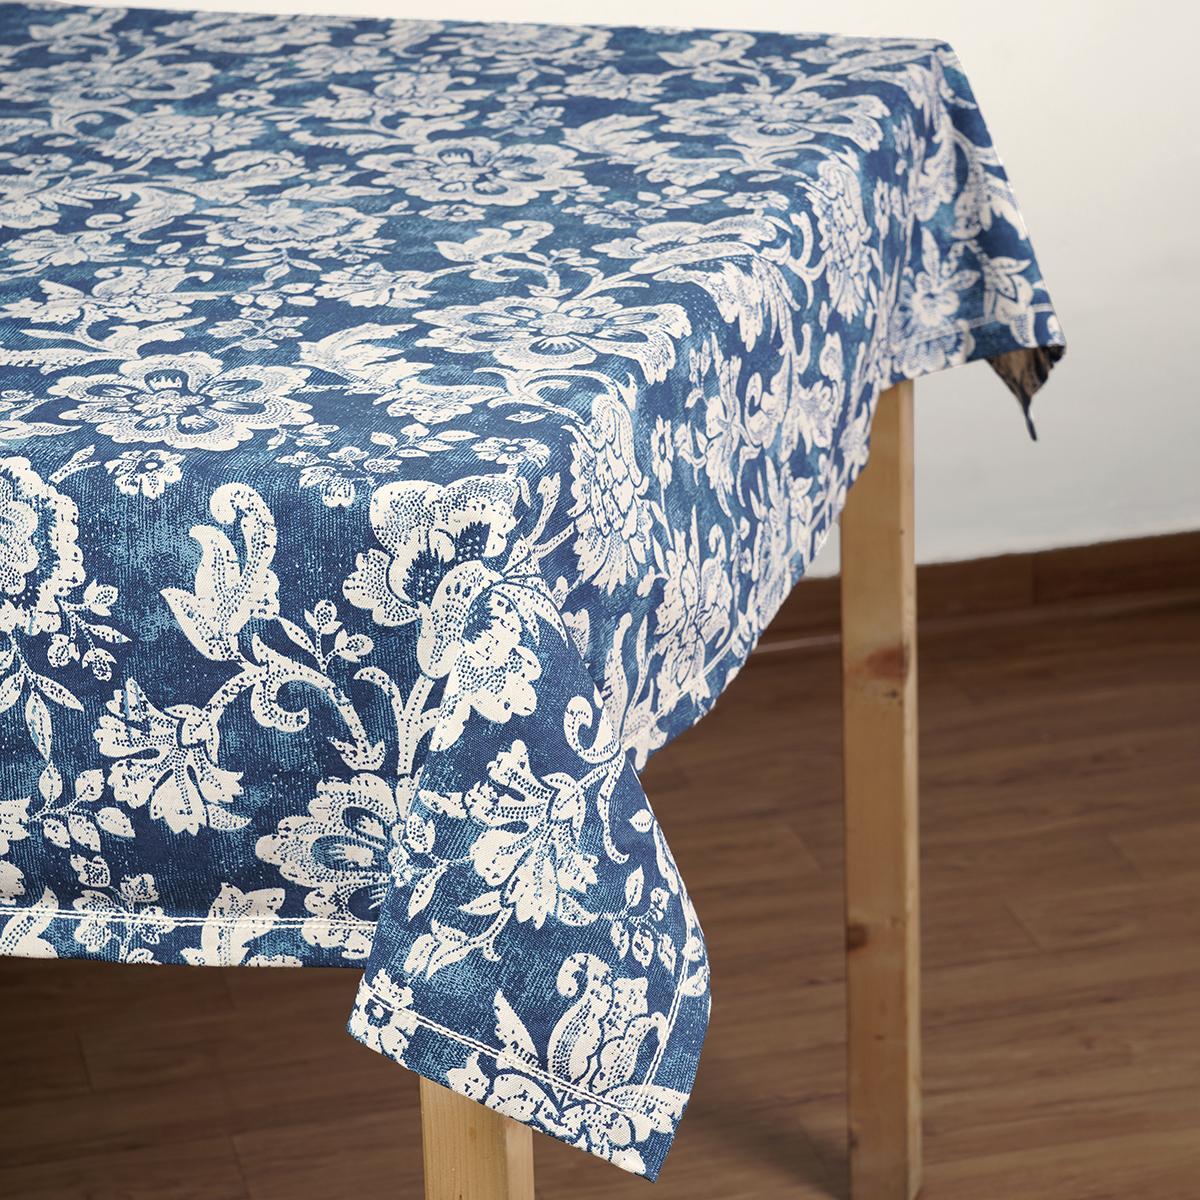 Indigo/Dark blue DOMINOTERIE bold floral print cotton table cover, sizes available